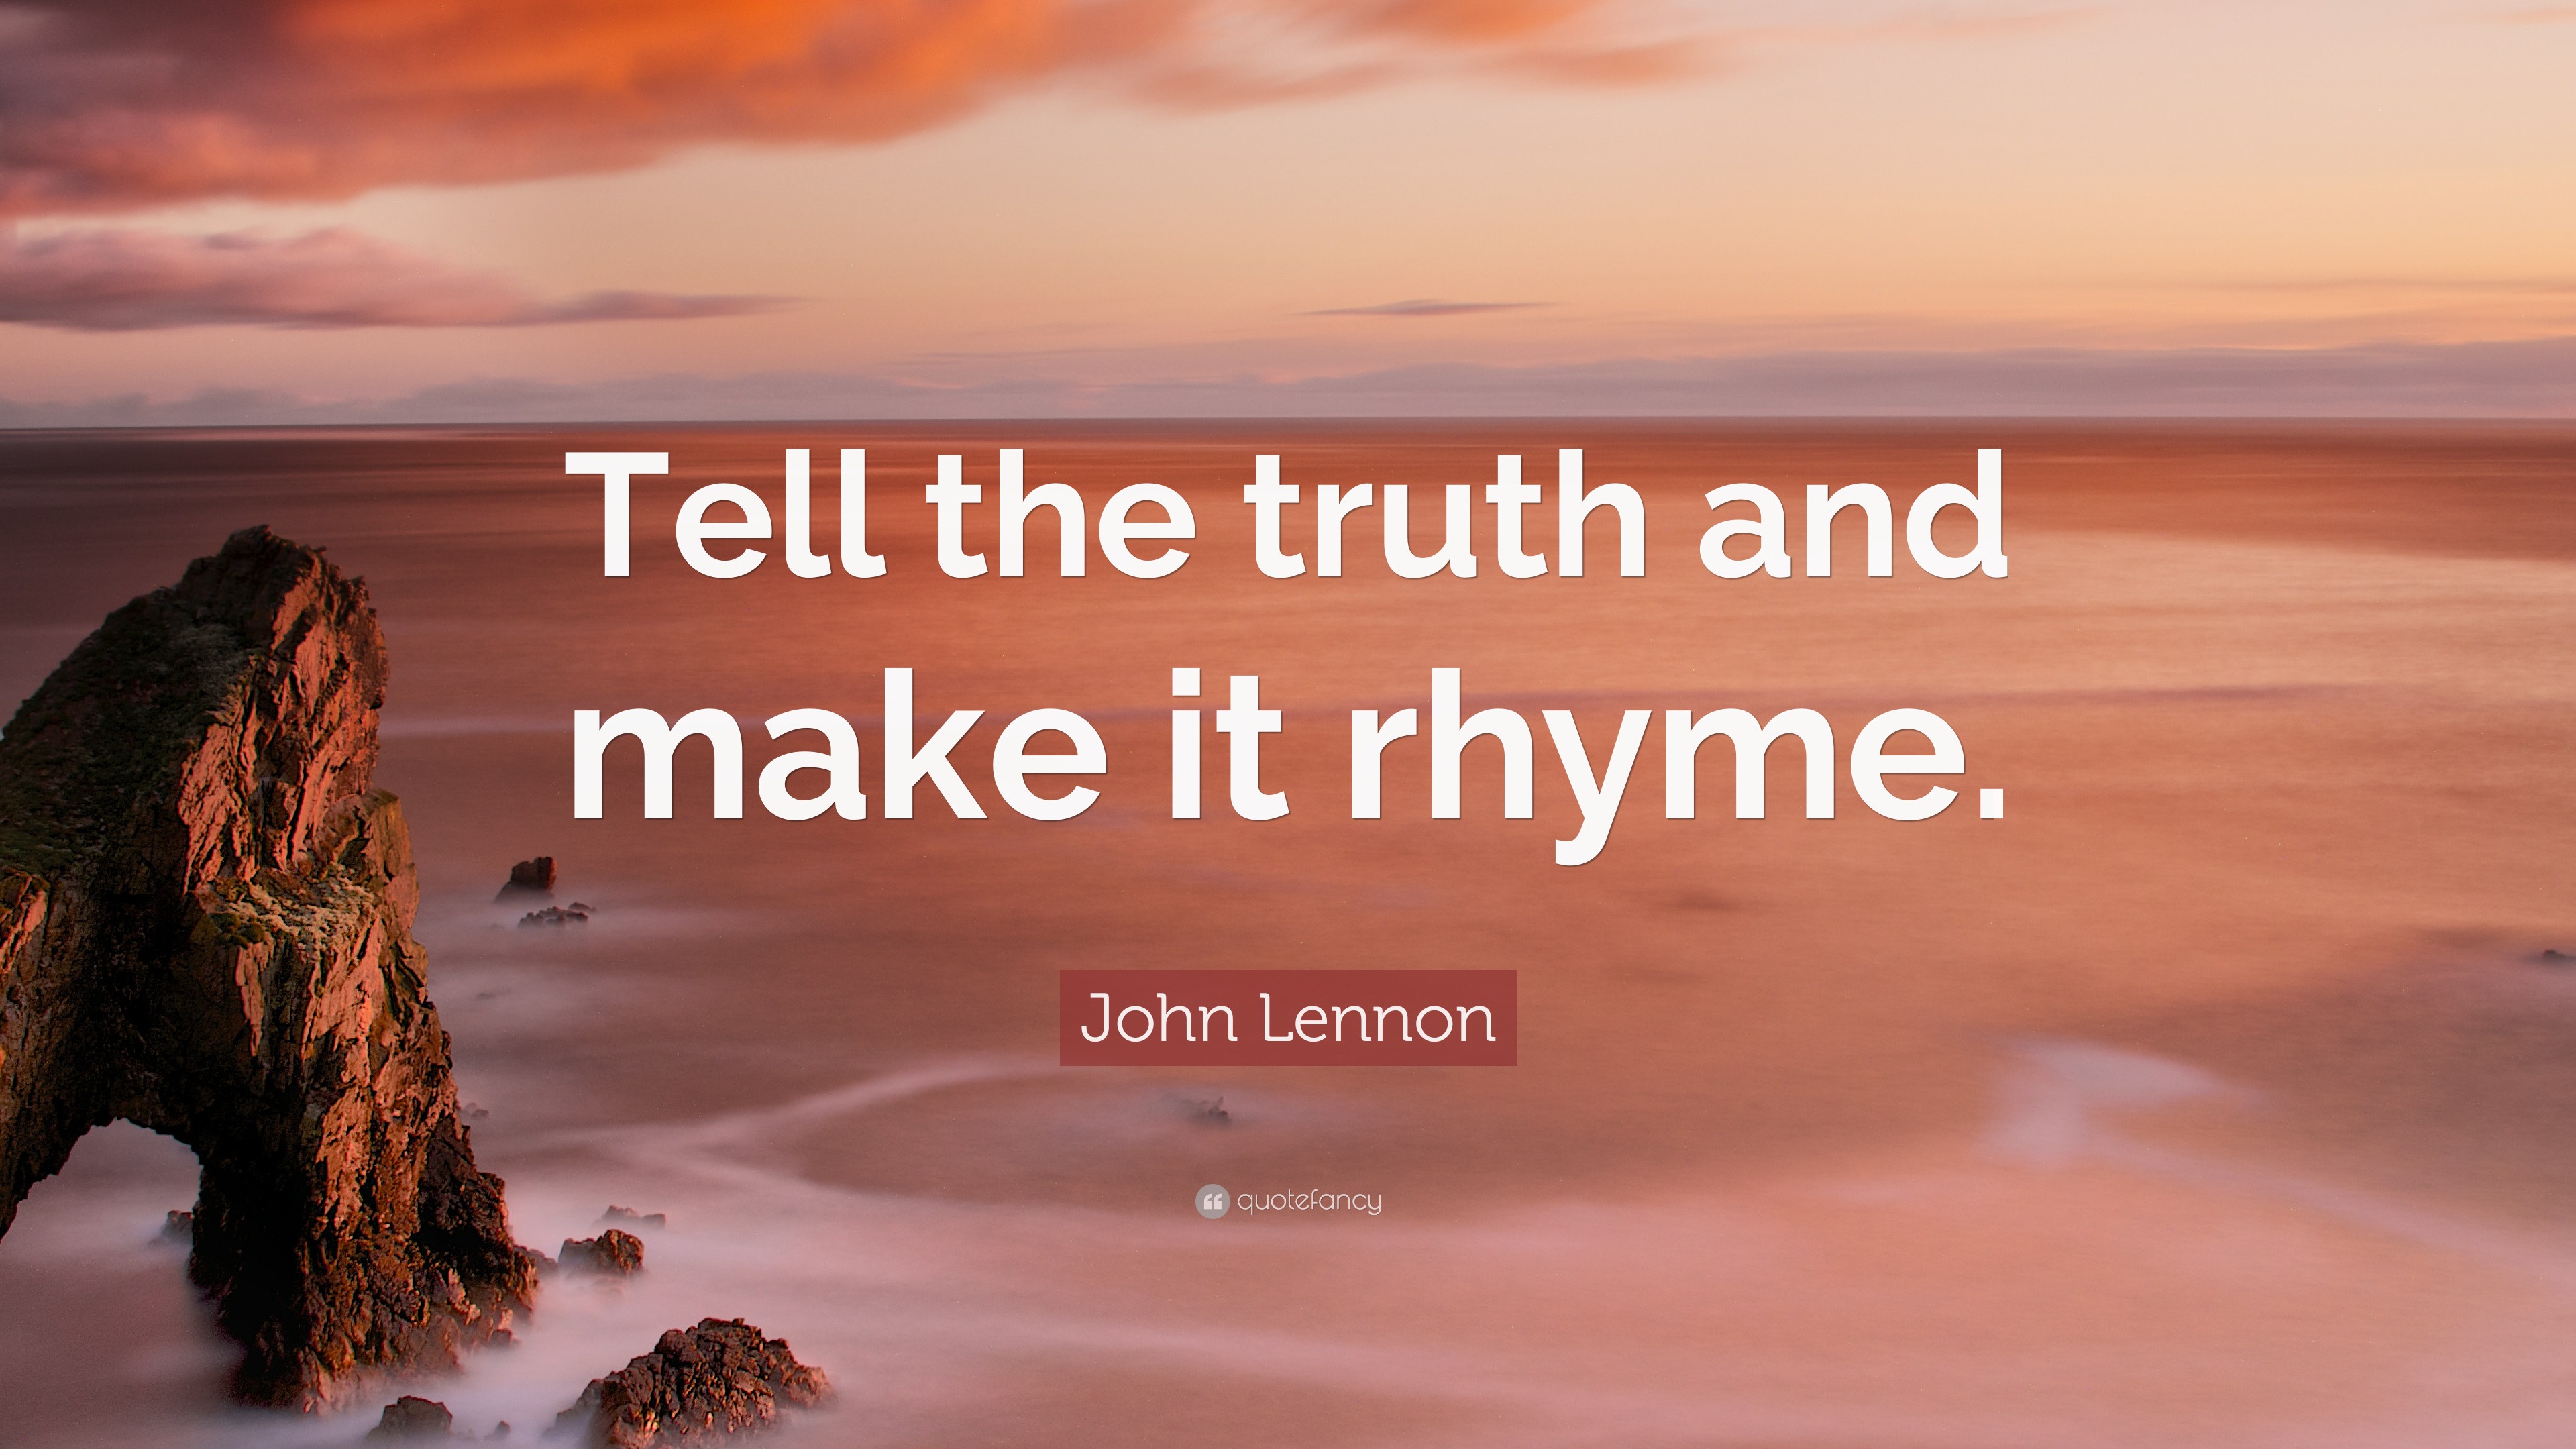 John Lennon Quote: “Tell the truth and make it rhyme.” (12 wallpapers